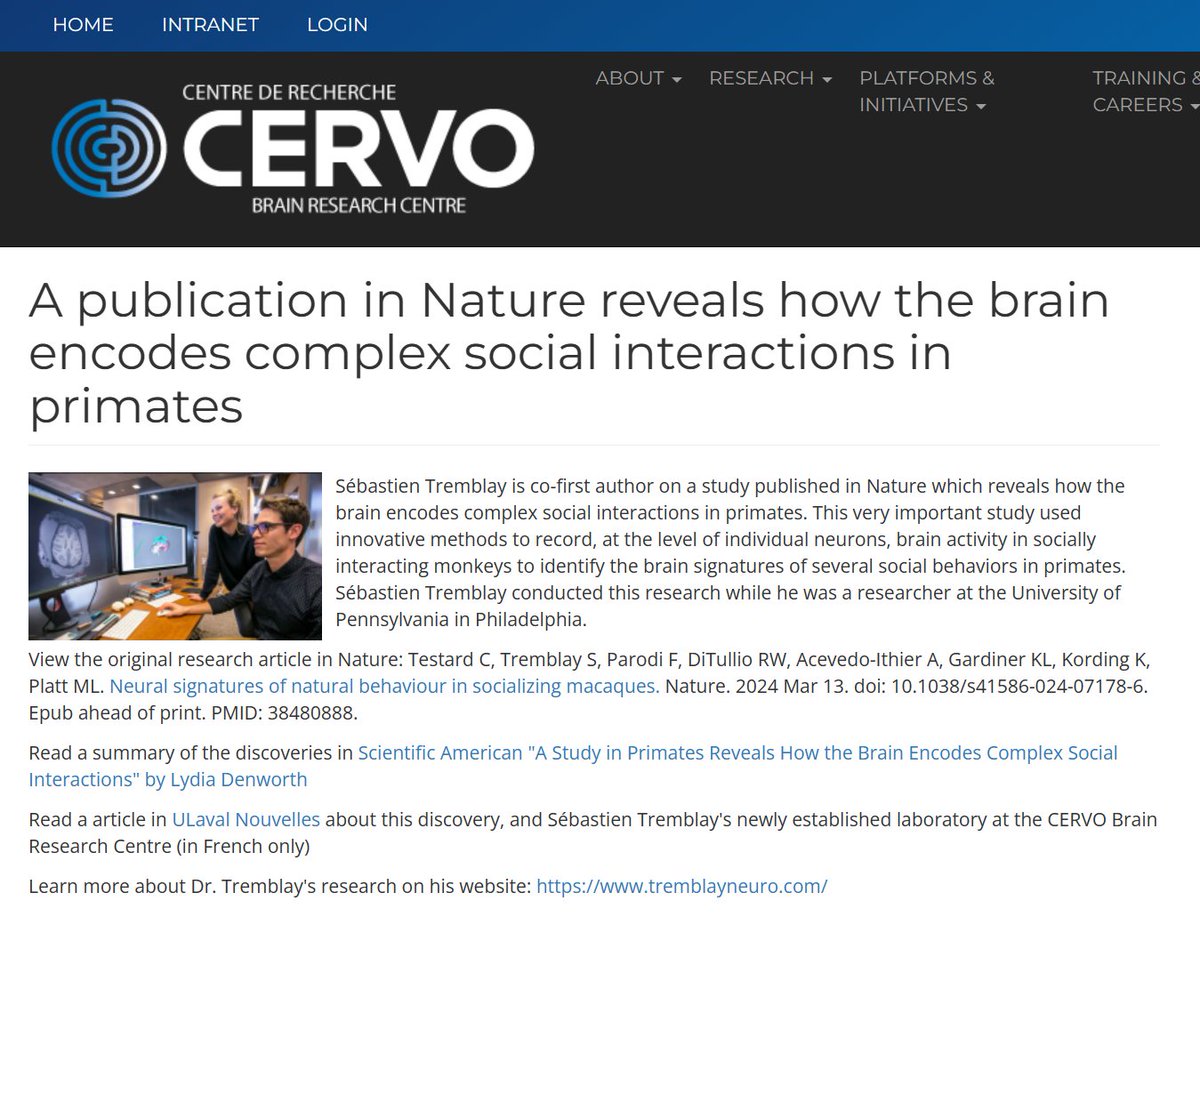 A publication in Nature by CERVO researcher Sébastien Tremblay reveals how the brain encodes complex social interactions in primates Read about it on our website: cervo.ulaval.ca/en/publication… Direct link to Nature paper: nature.com/articles/s4158…